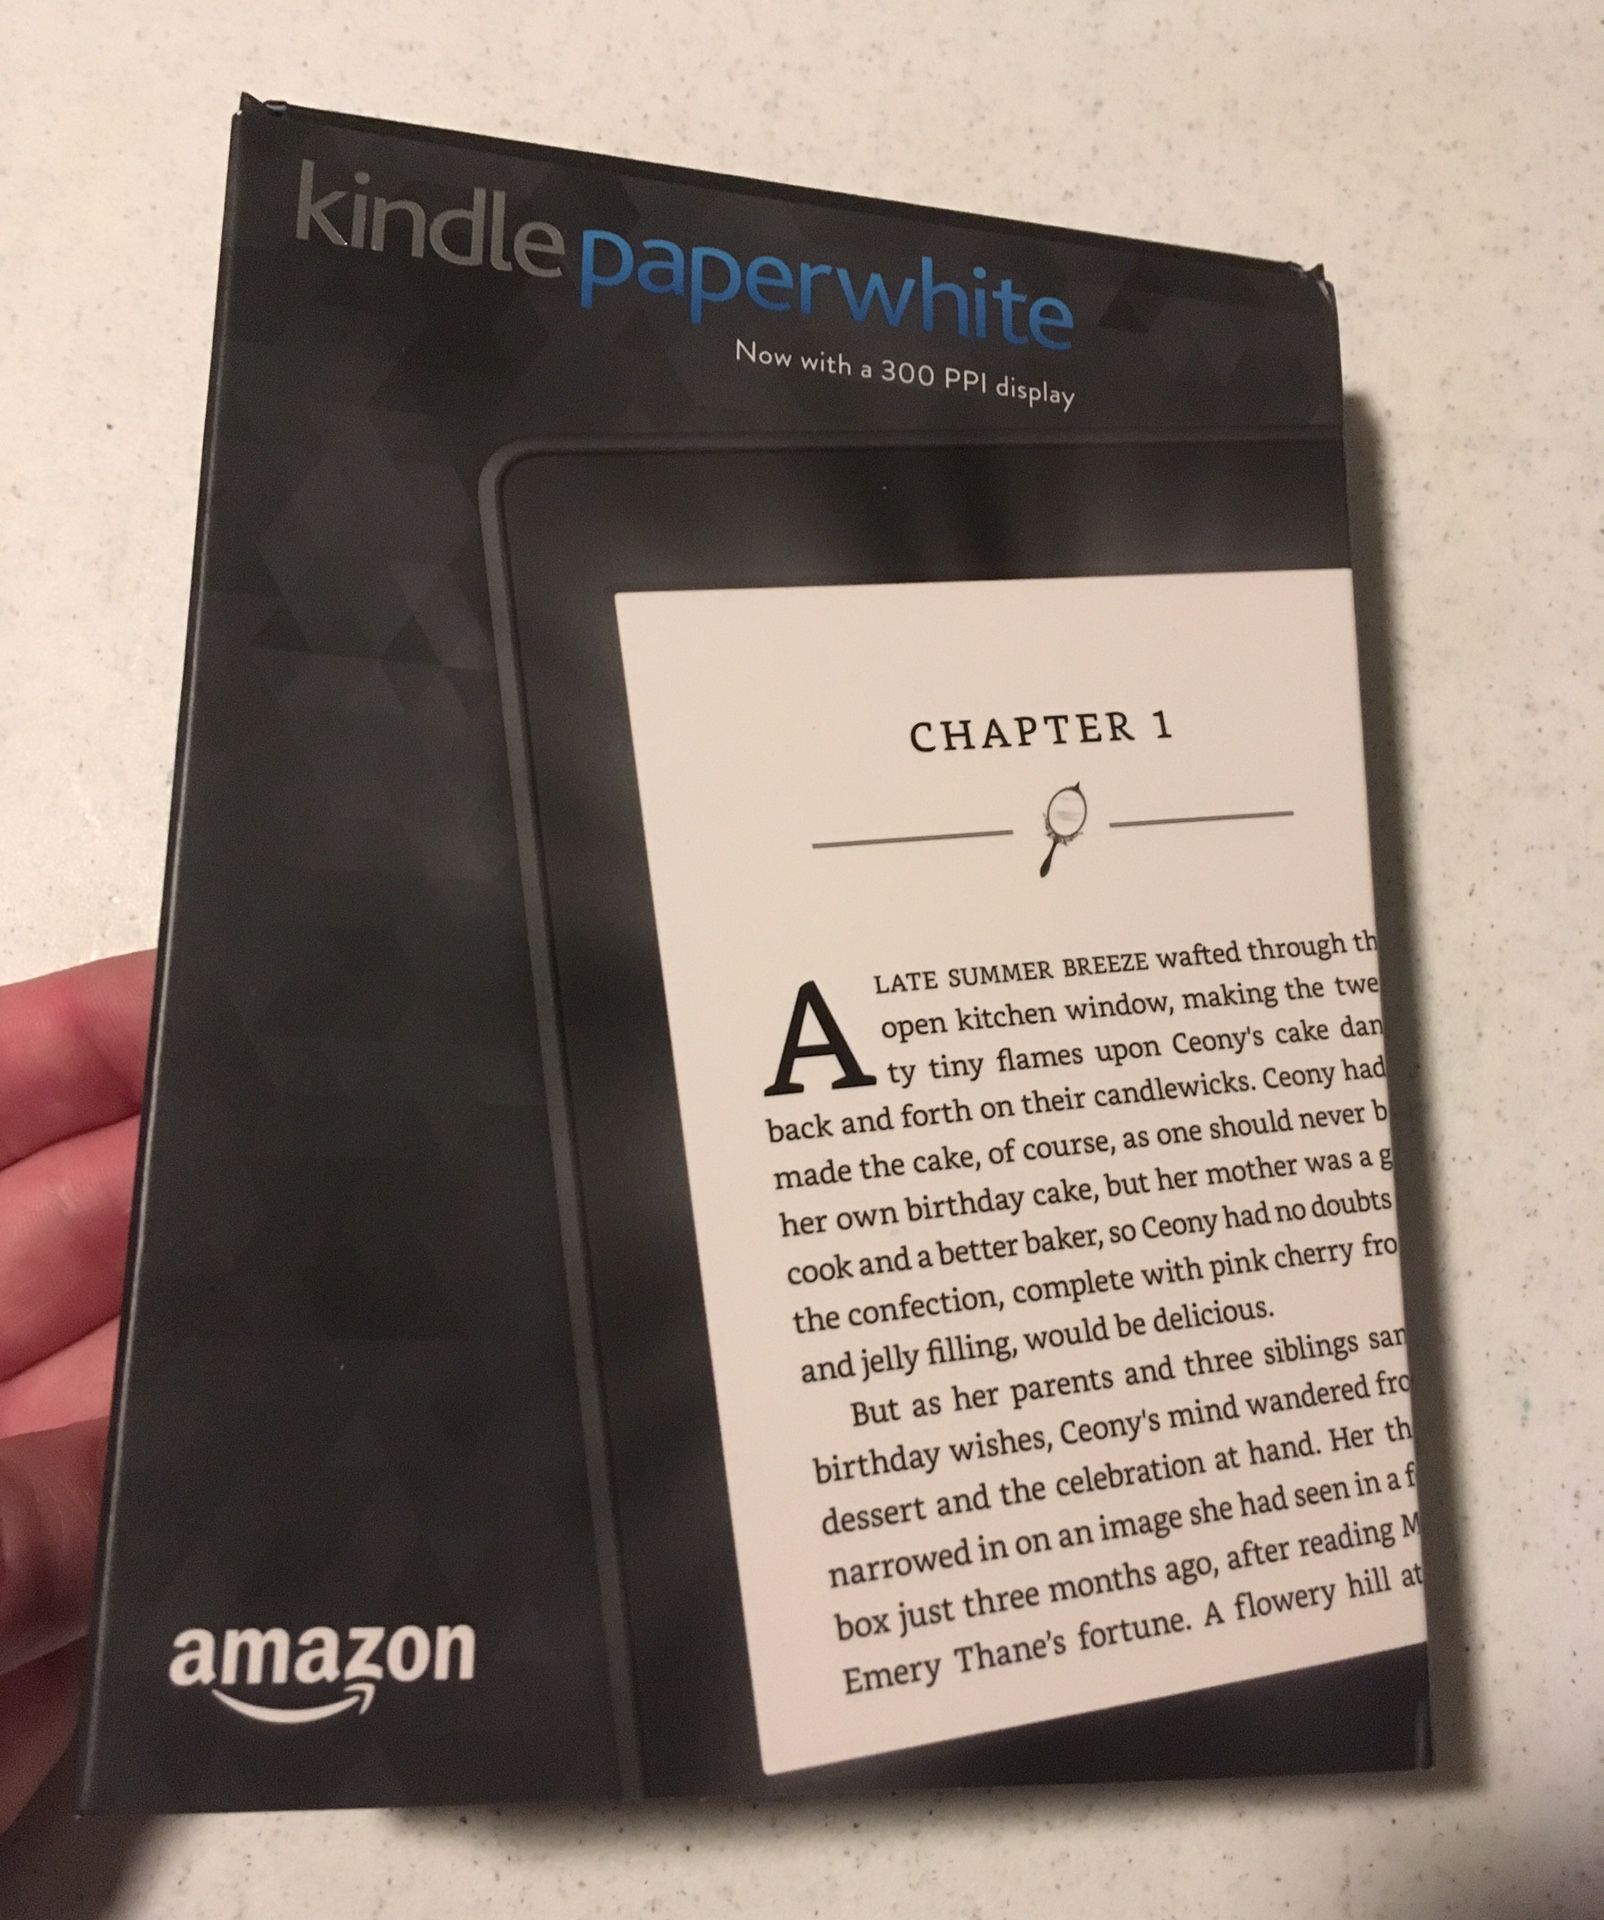 Kindle Paperwhite ereader by Amazon book reader